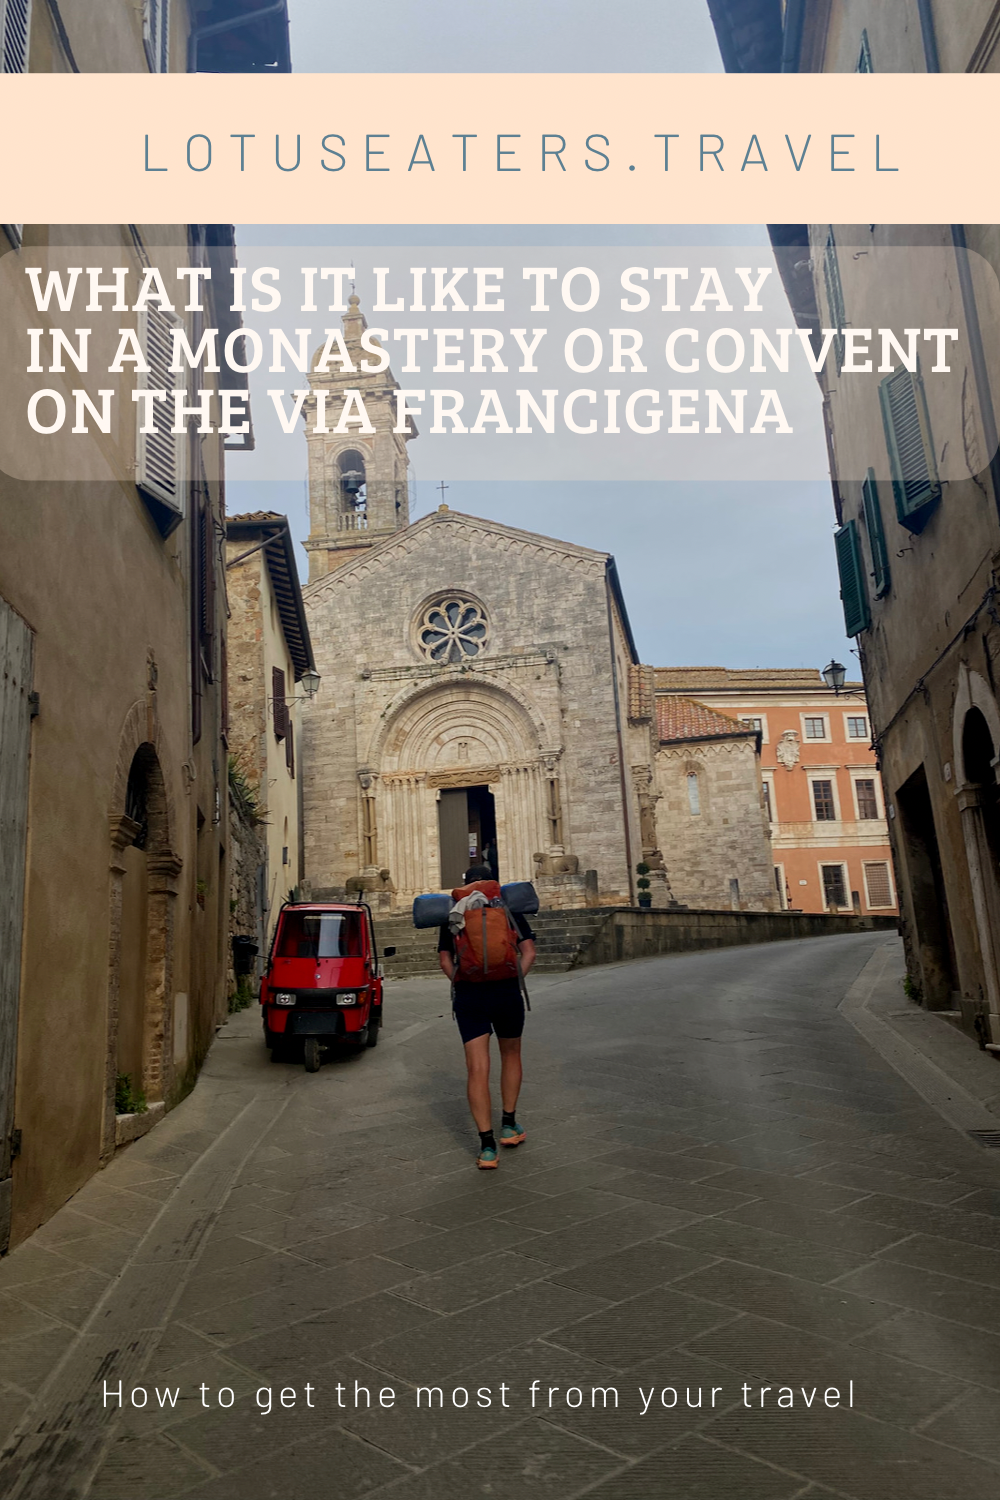 What is it like to stay in a convent or monastery on the Via Francigena?